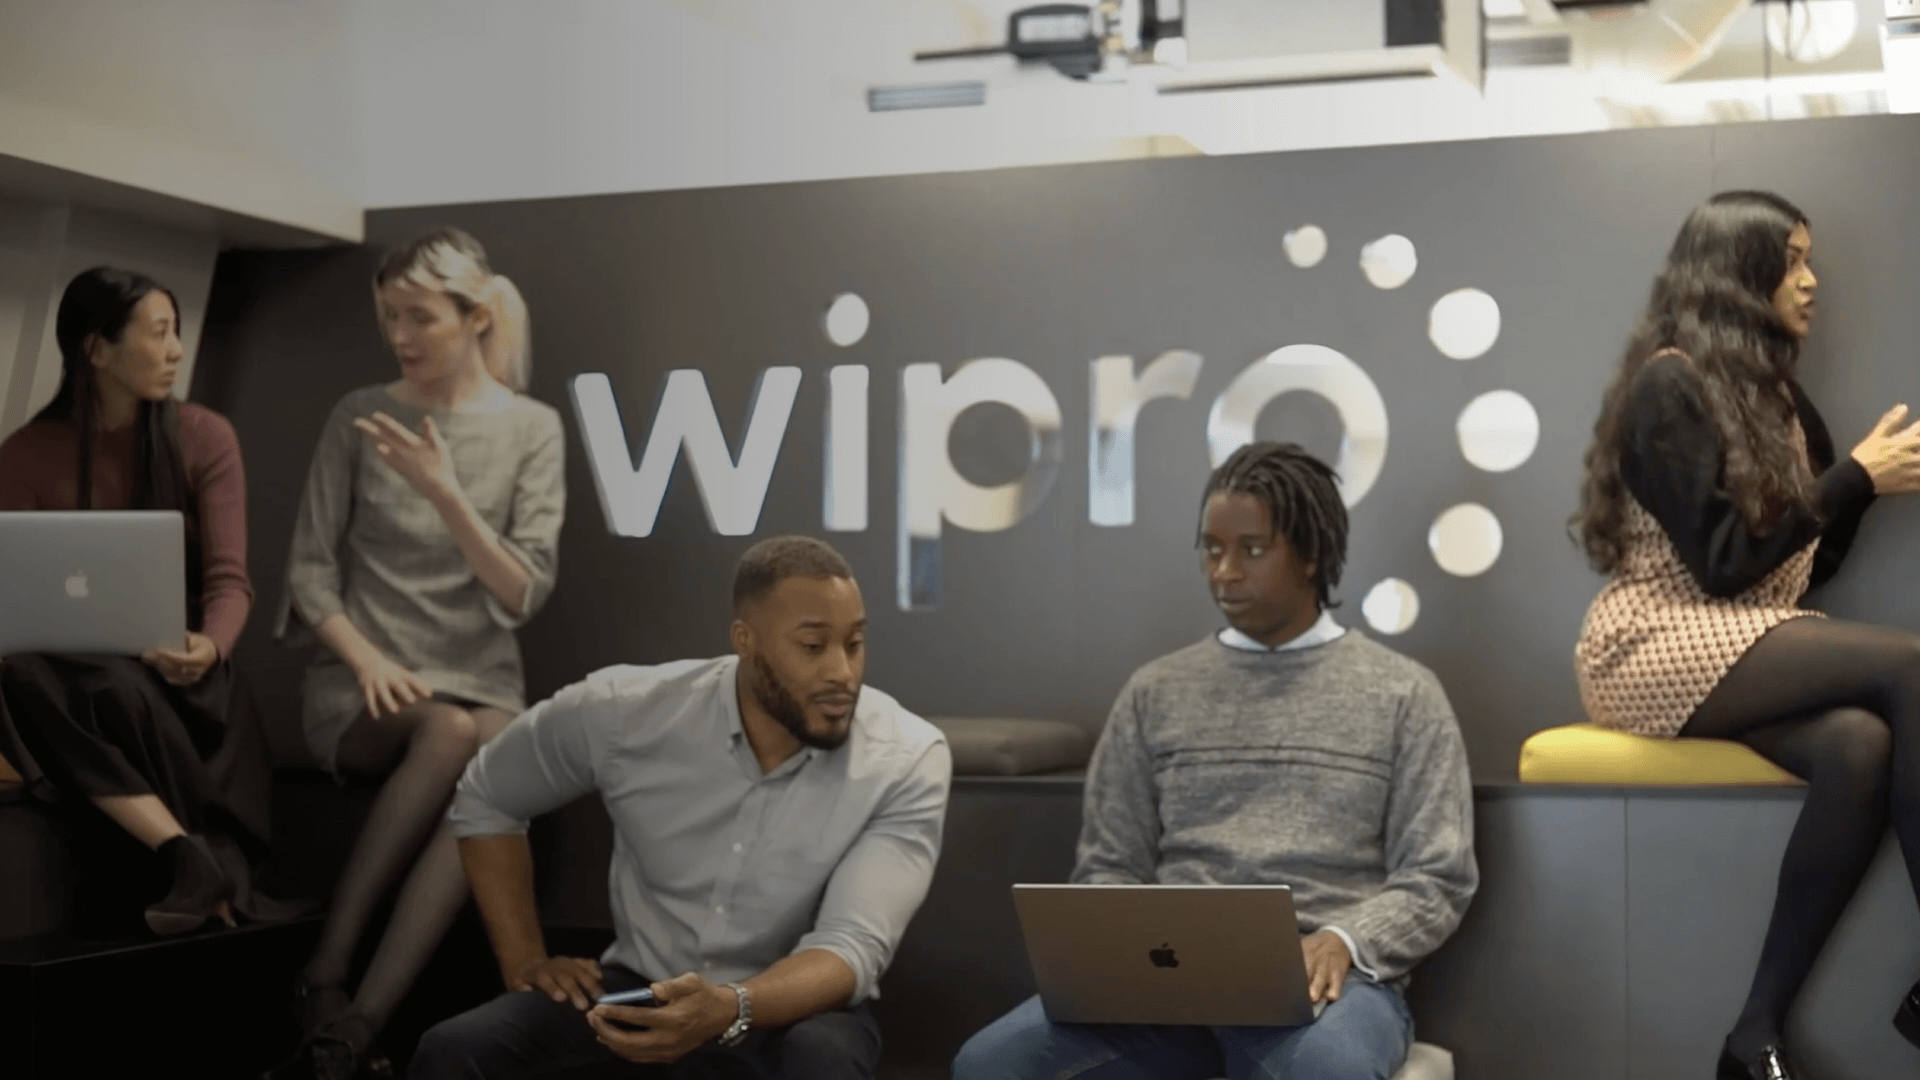 Is Wipro Sex Video - About Wipro - Transformative Innovations and Global Solutions